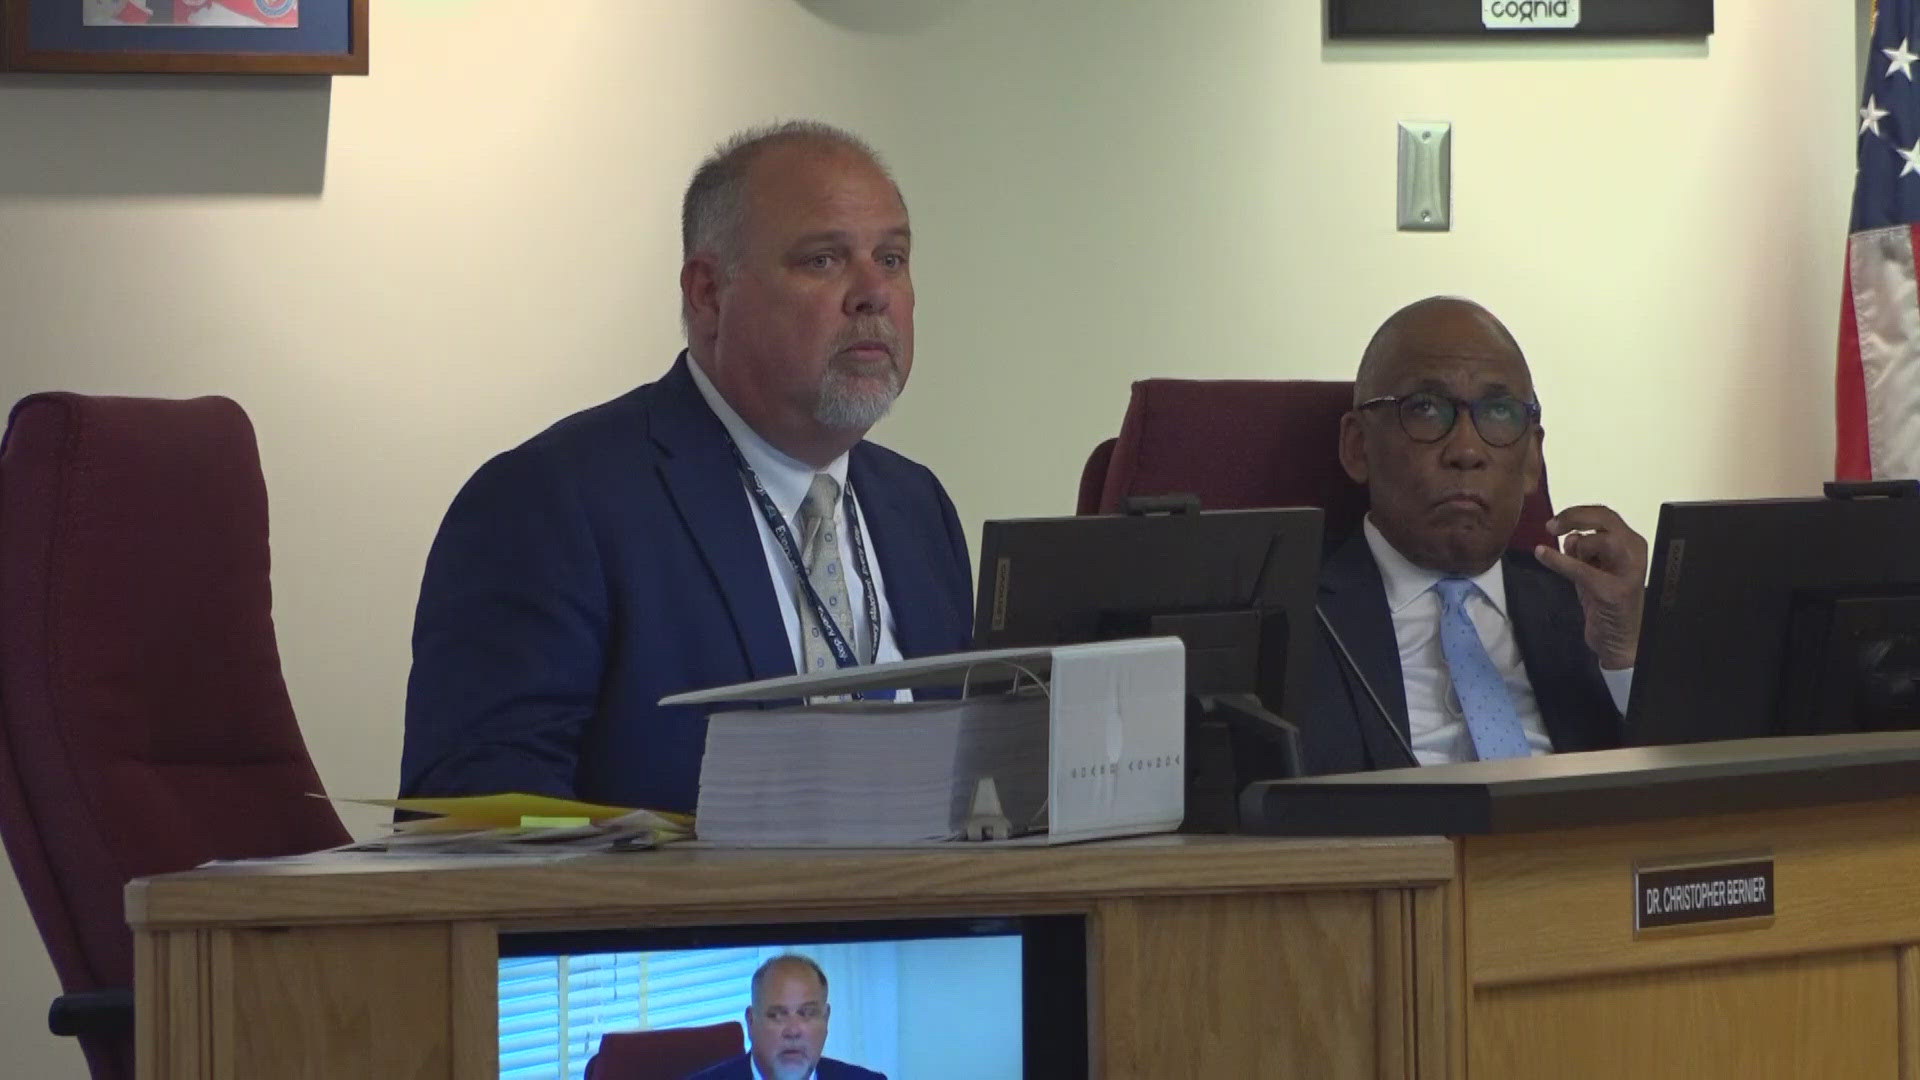 Duval County Public Schools Superintendent Dr. Christopher Bernier was sworn in hours before he attended his first board meeting on Tuesday.